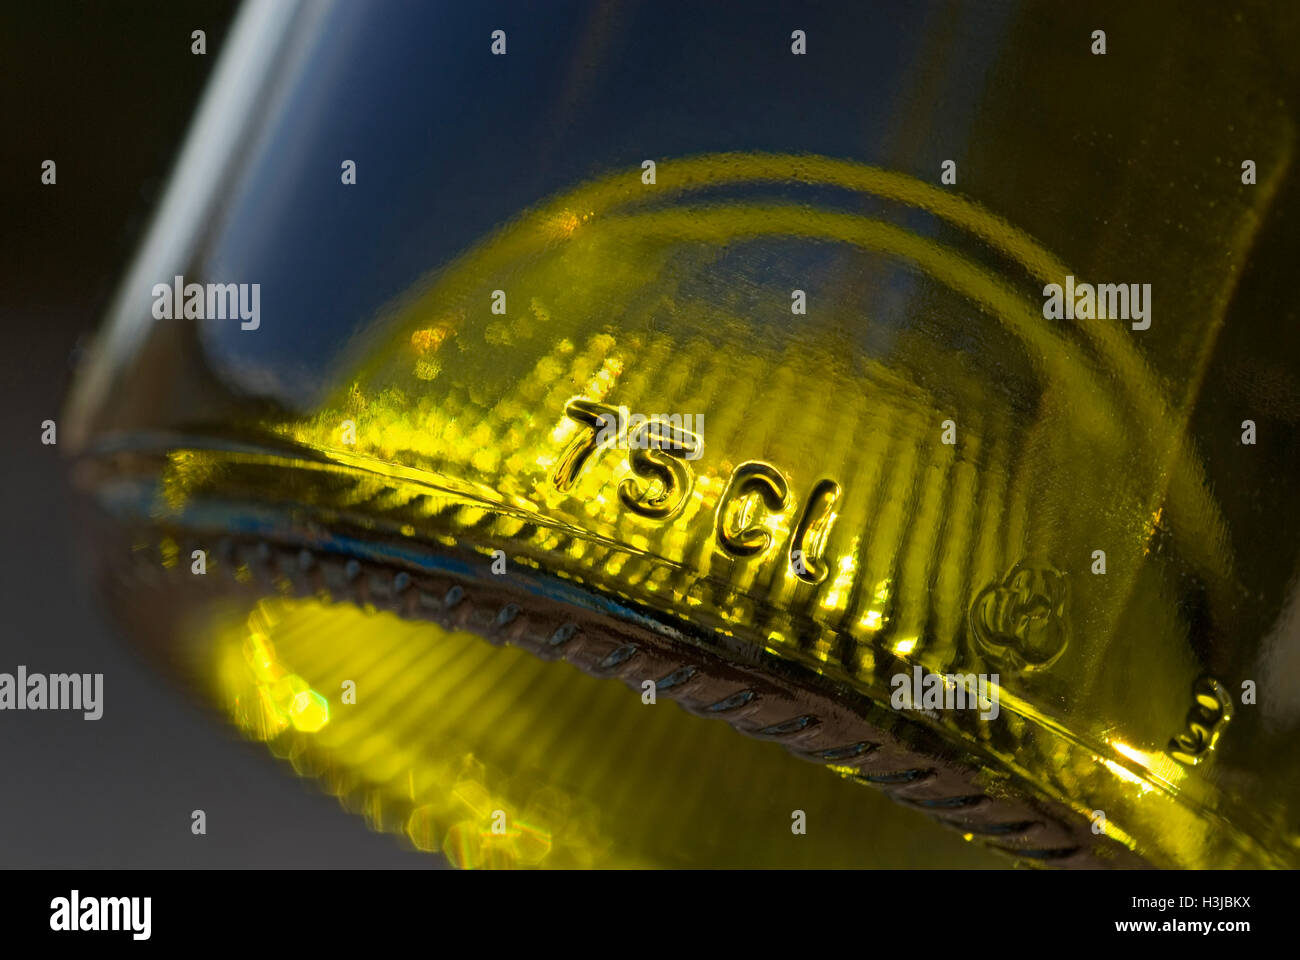 Close up on 75 cl capacity glass relief engraving on bottom of standard wine bottle Stock Photo